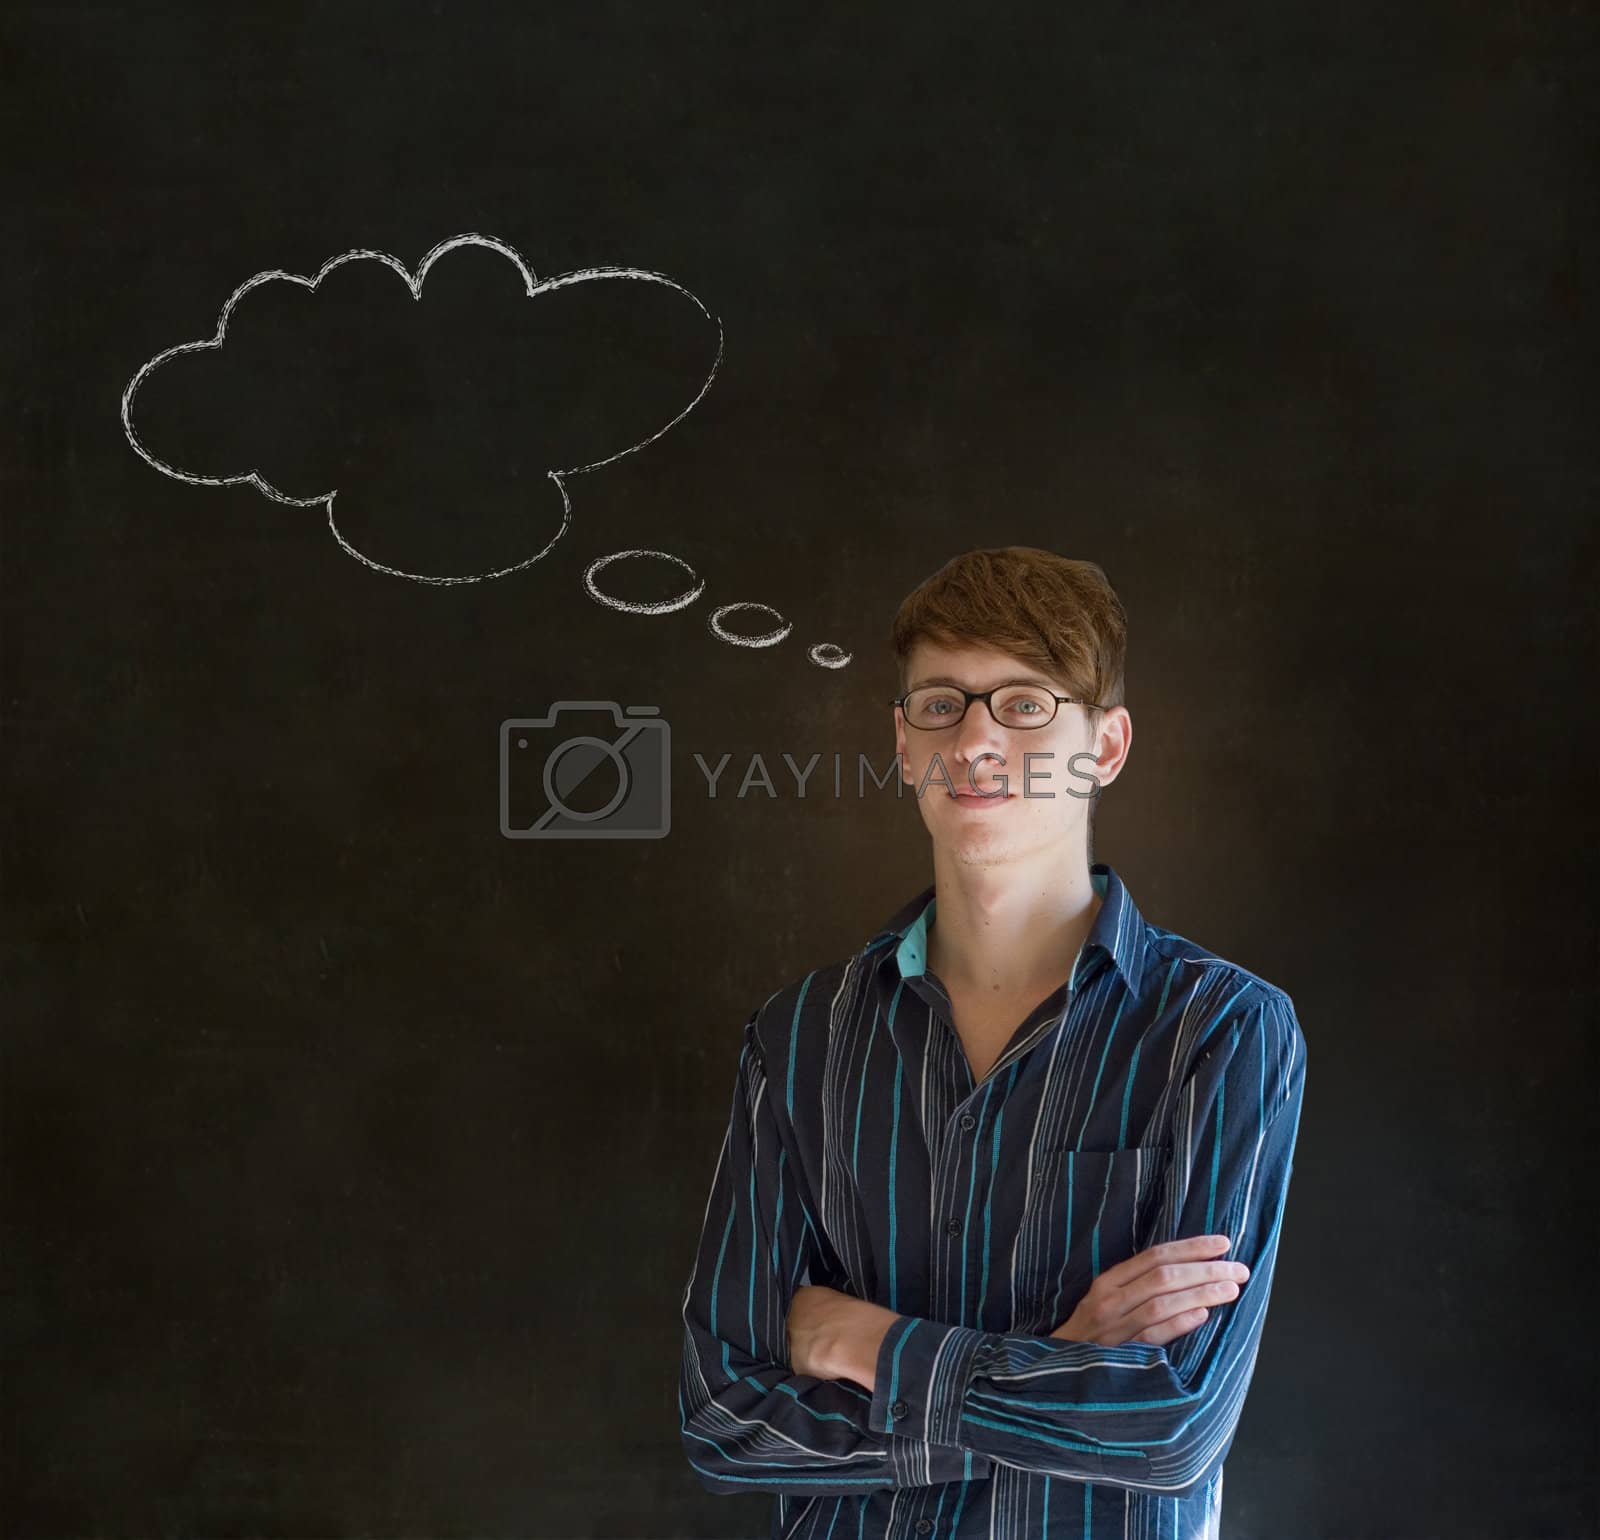 Royalty free image of Man with thought thinking chalk cloud by alistaircotton